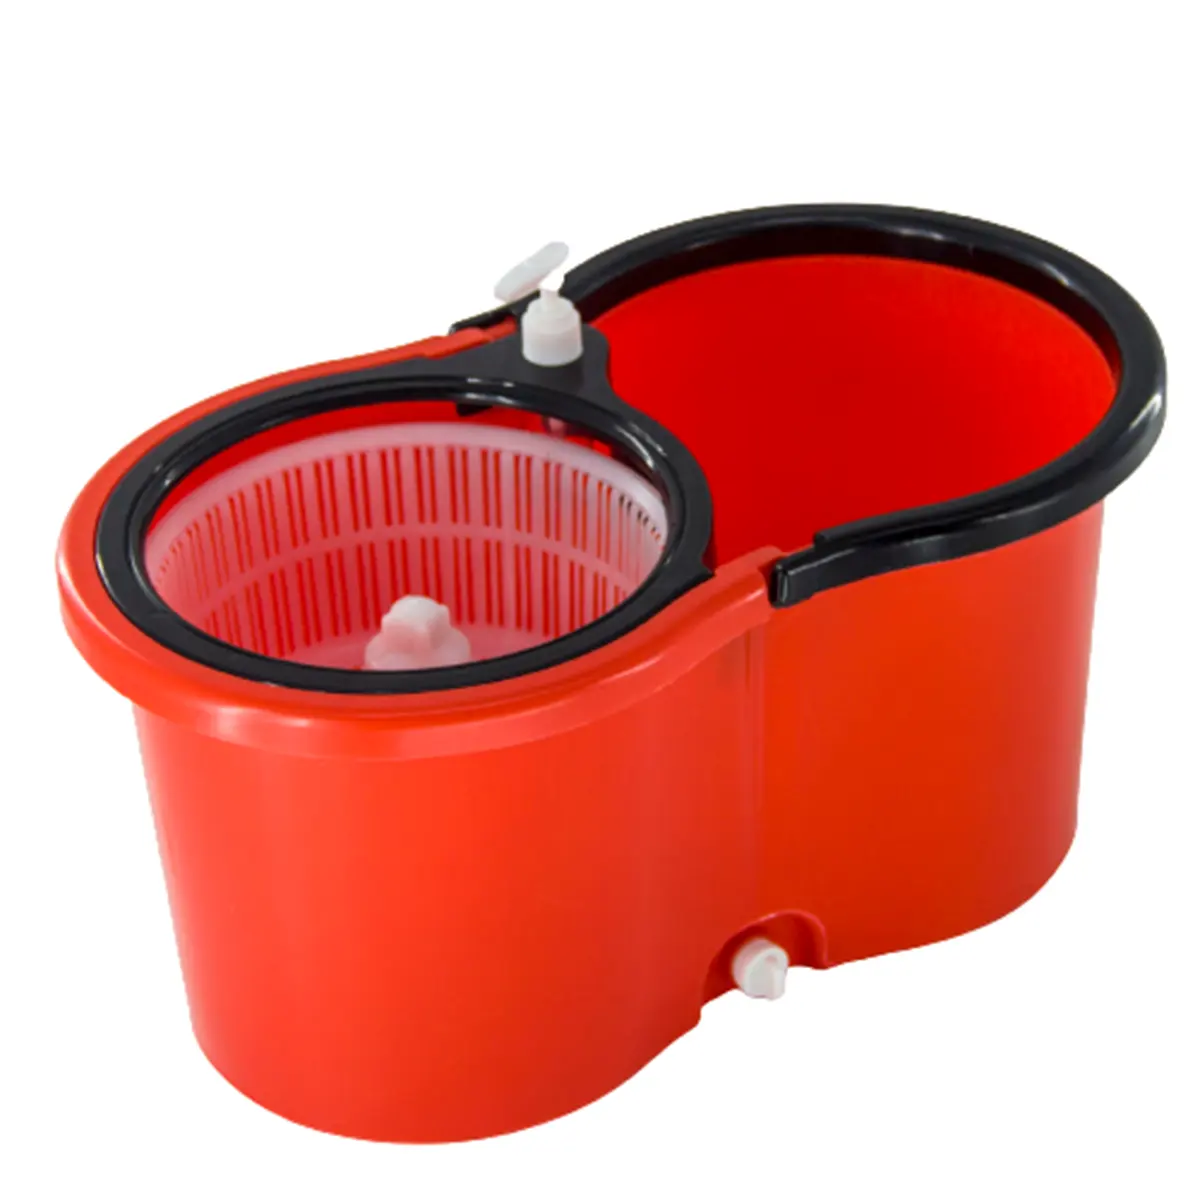 spin 360 magic mops hot flat cleaner automatic china wholesale price easy cleaning floor mop bucket